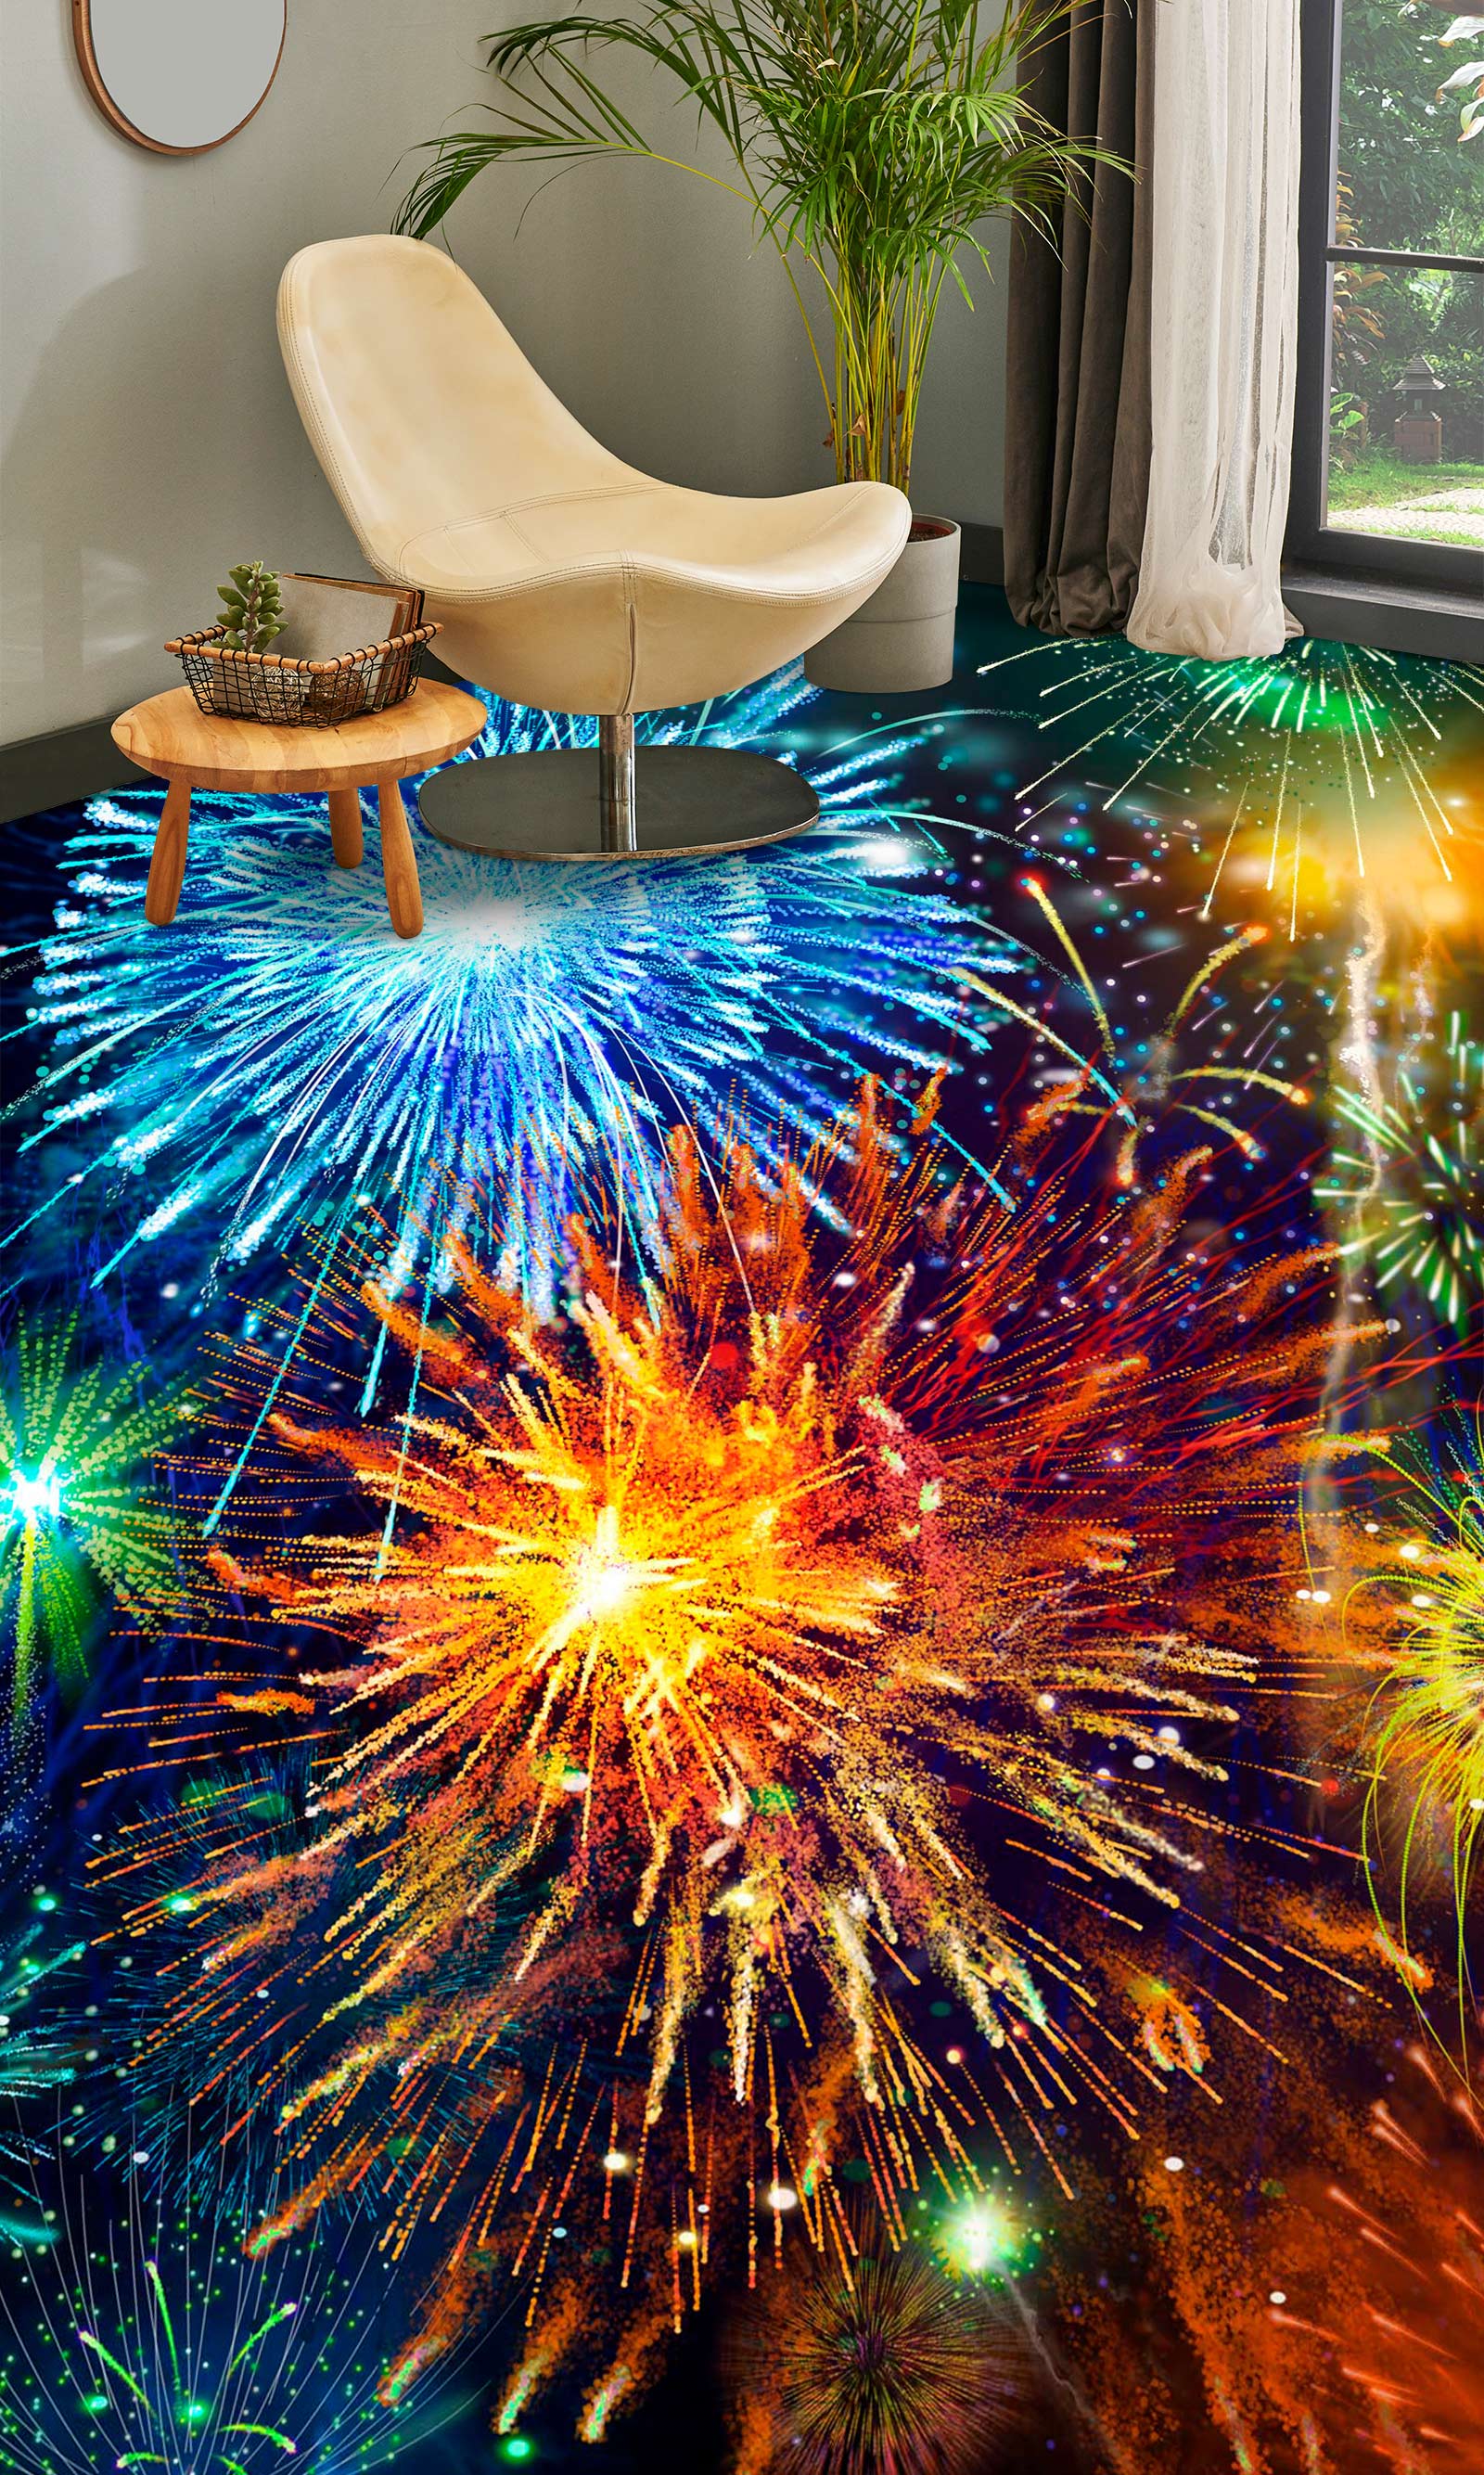 3D Bright Fireworks 1402 Floor Mural  Wallpaper Murals Self-Adhesive Removable Print Epoxy